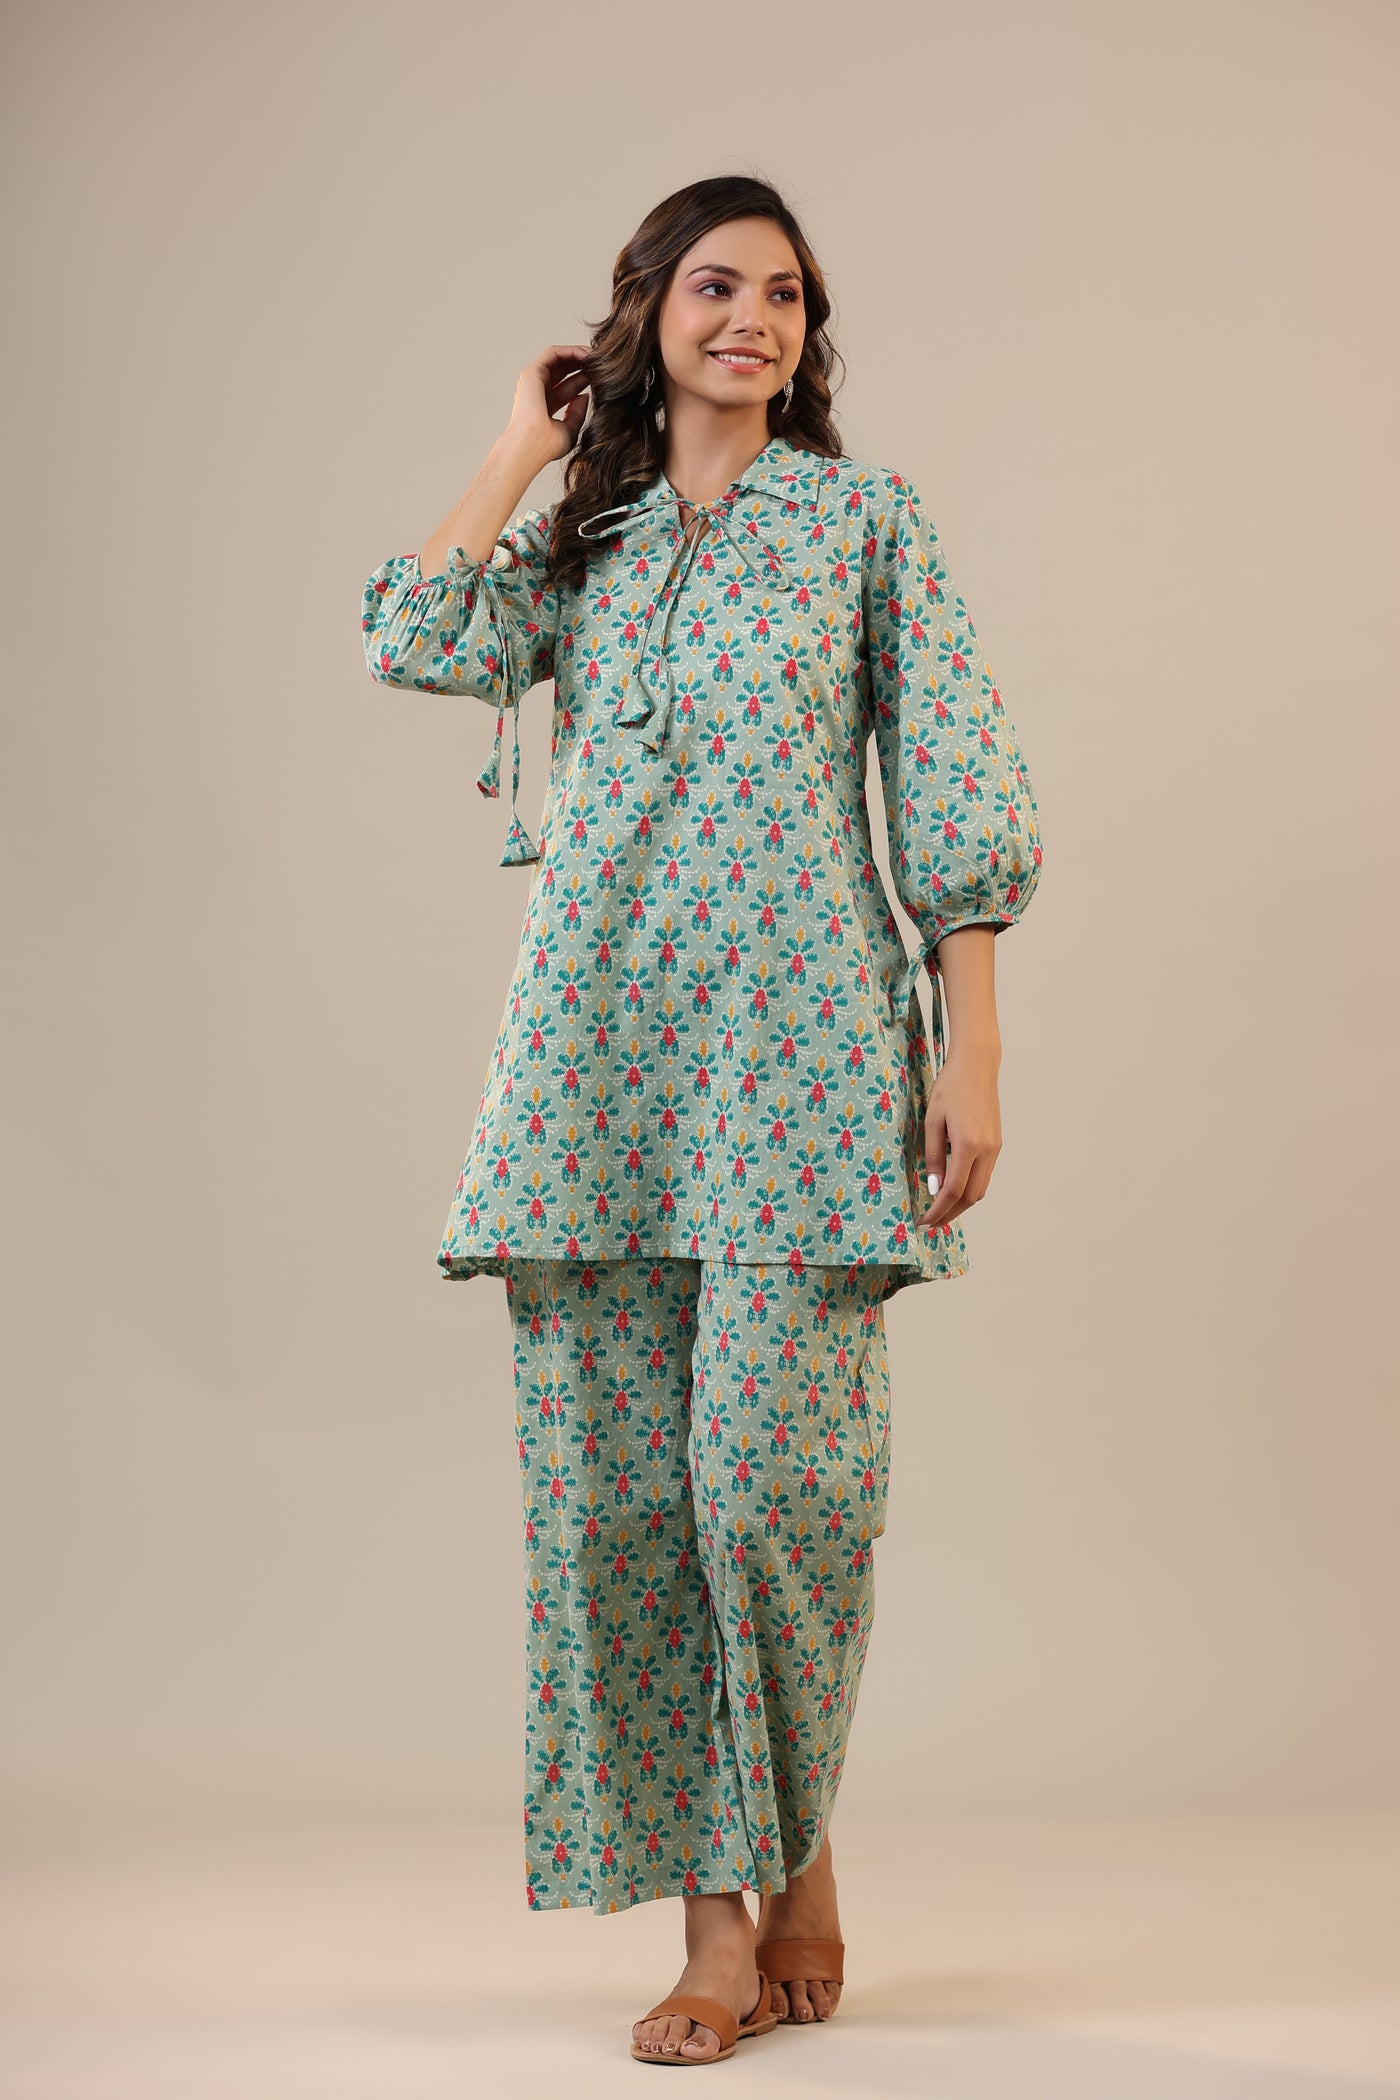 Ikat Checkered Florals on Cotton Collared Loungewear Set